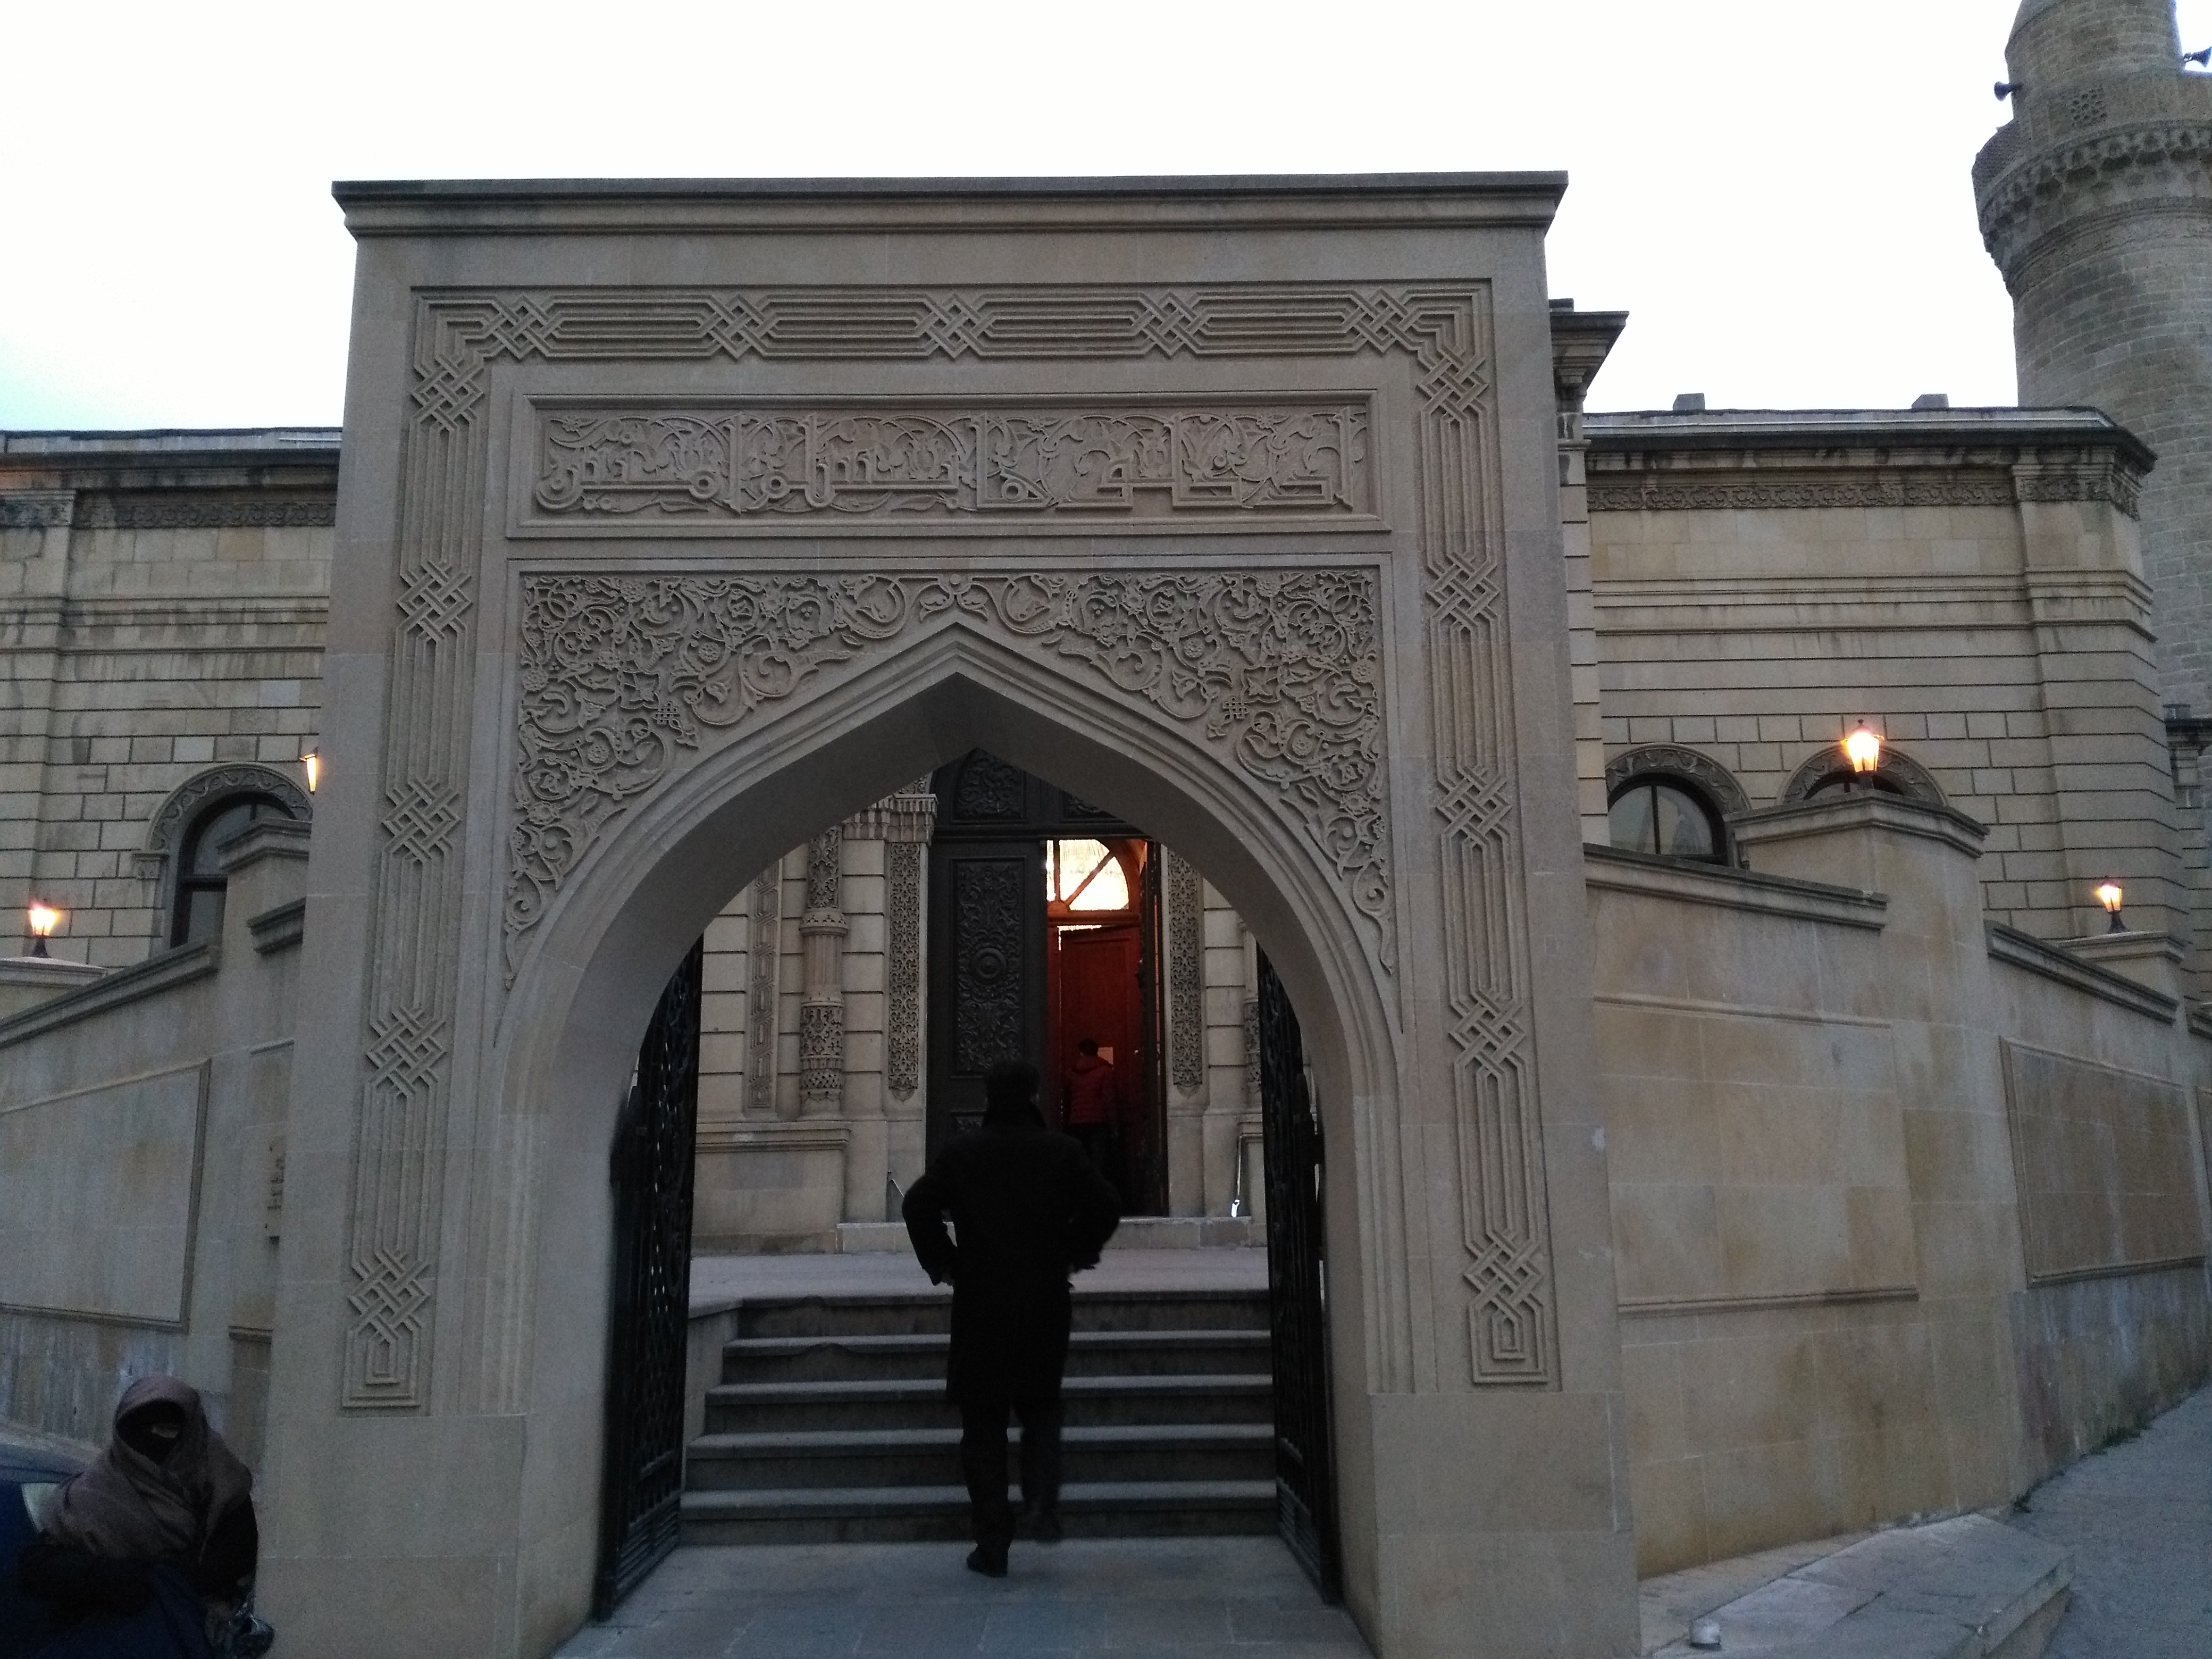 Entrance of the Taza Pir Mosque.